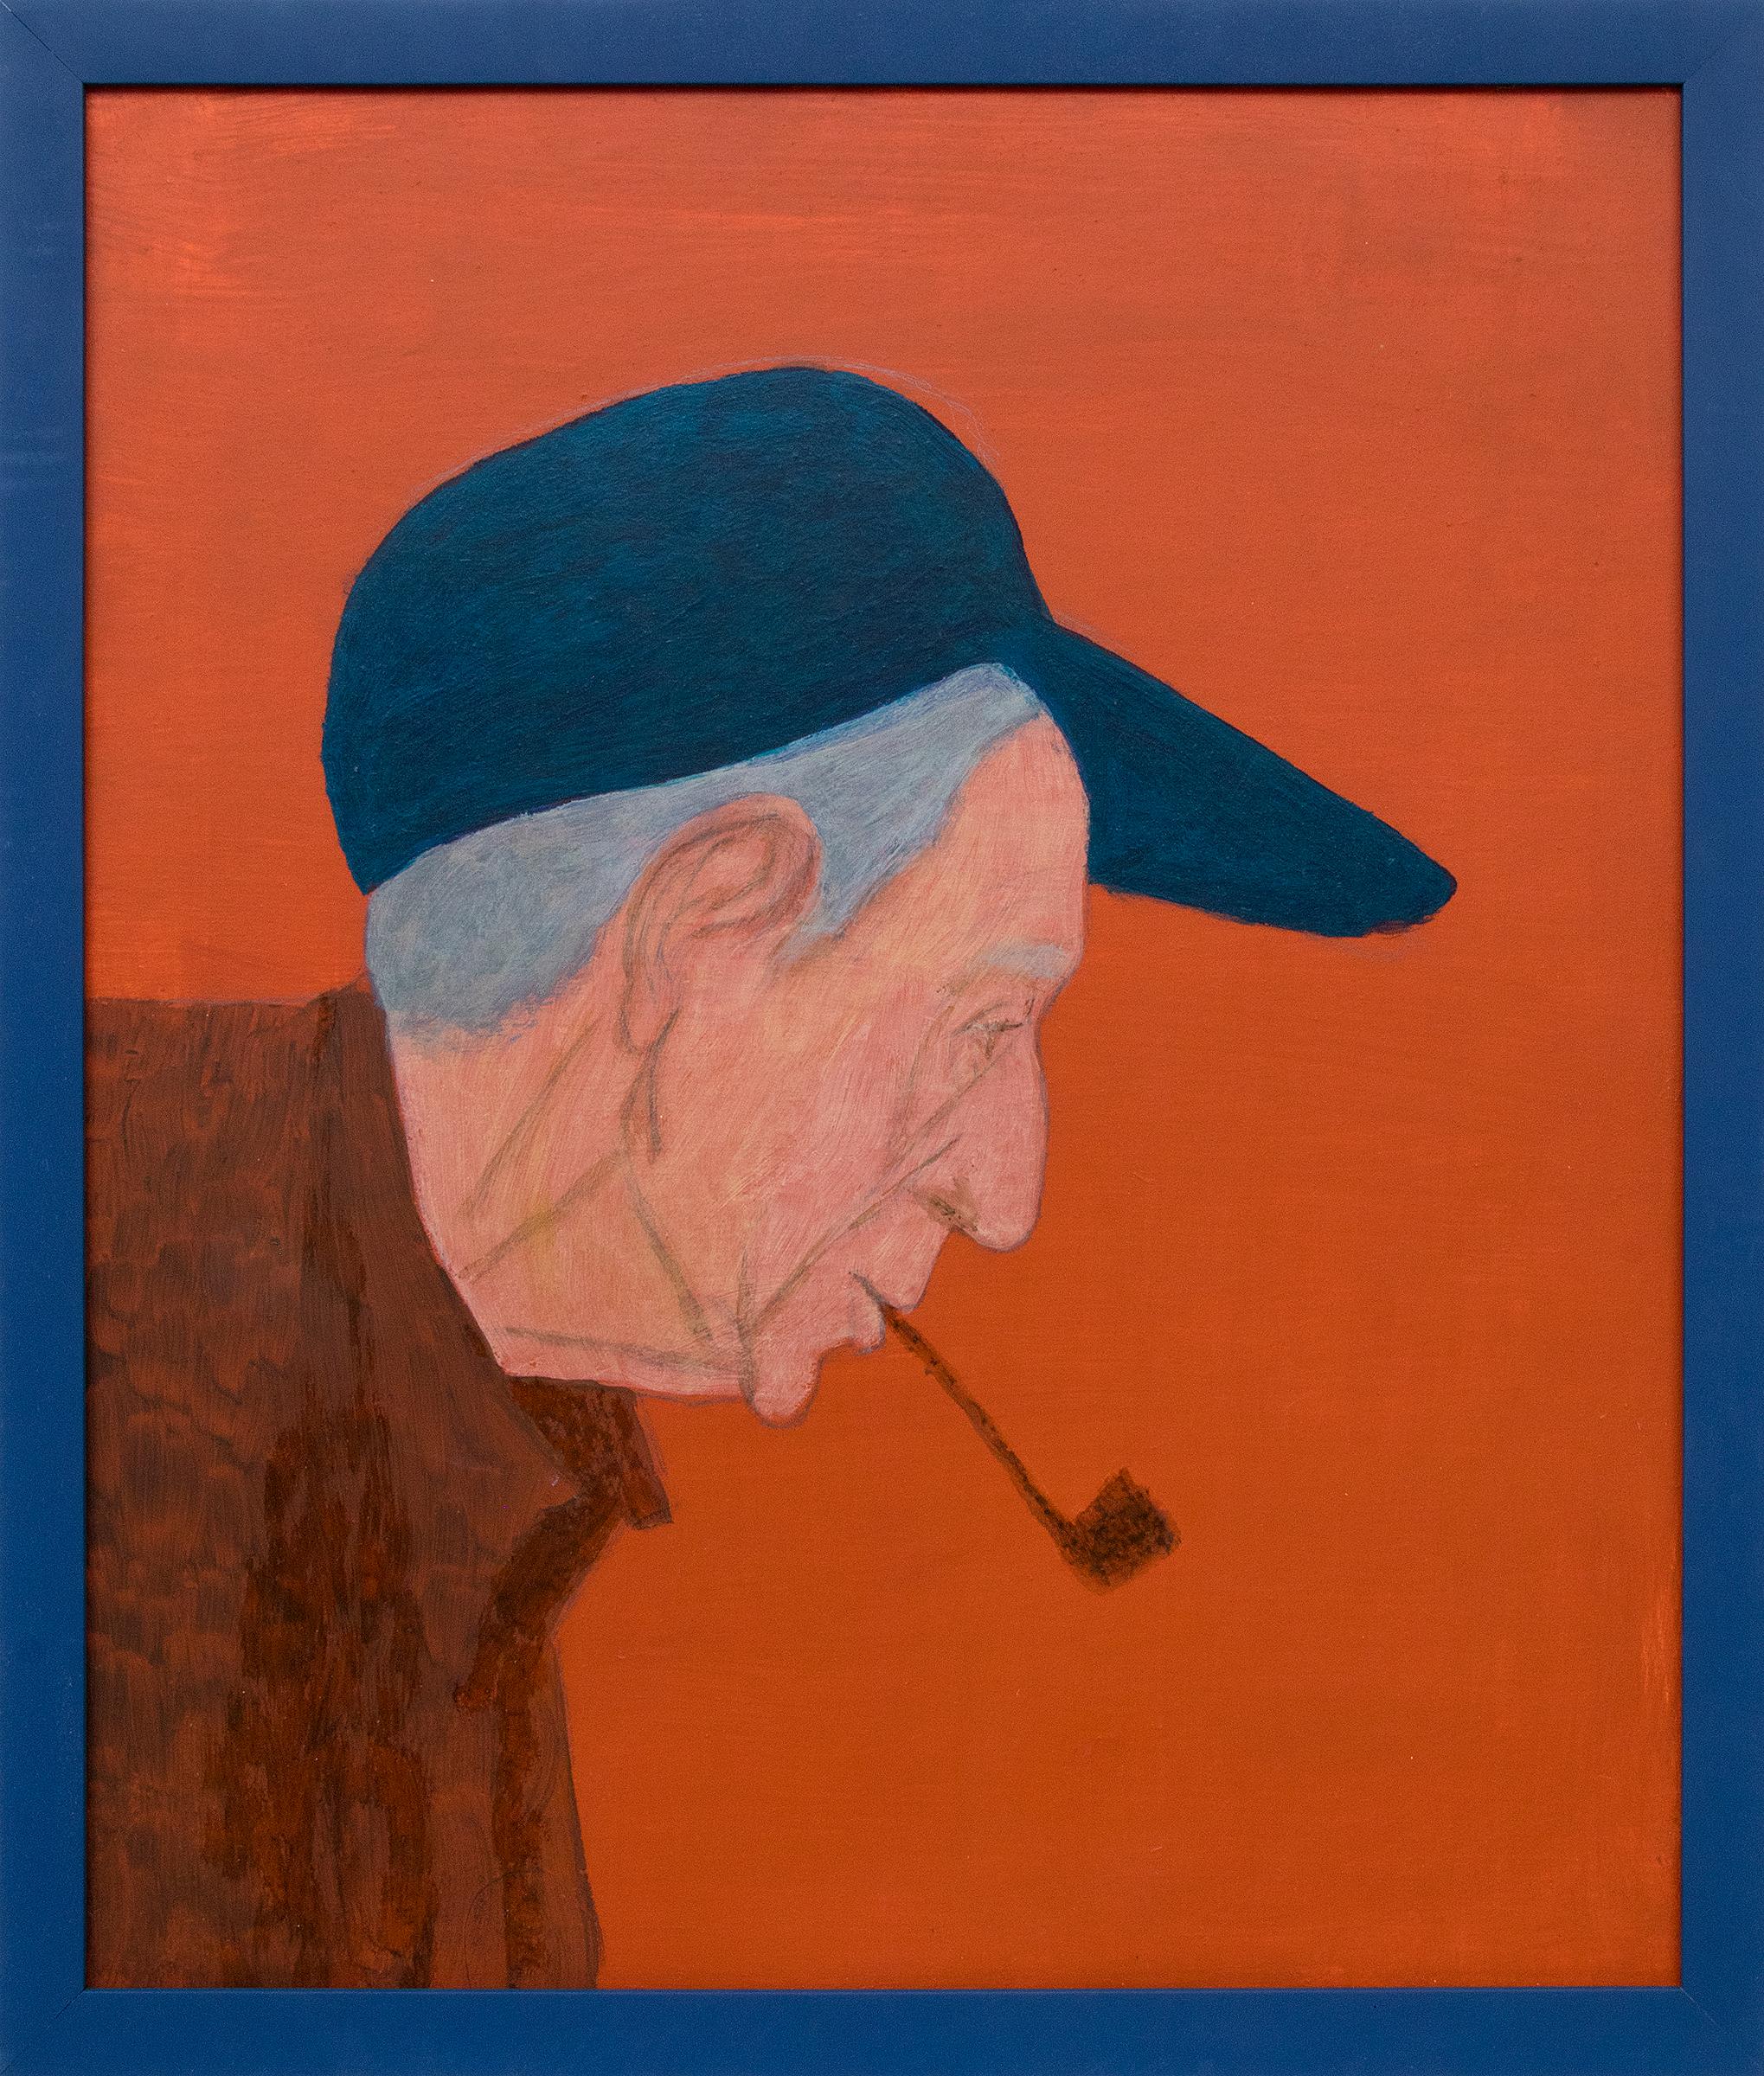 Portrait of a Man in Profile Smoking a Pipe, Orange, Blue, Brown, Gray - Painting by Margo Hoff